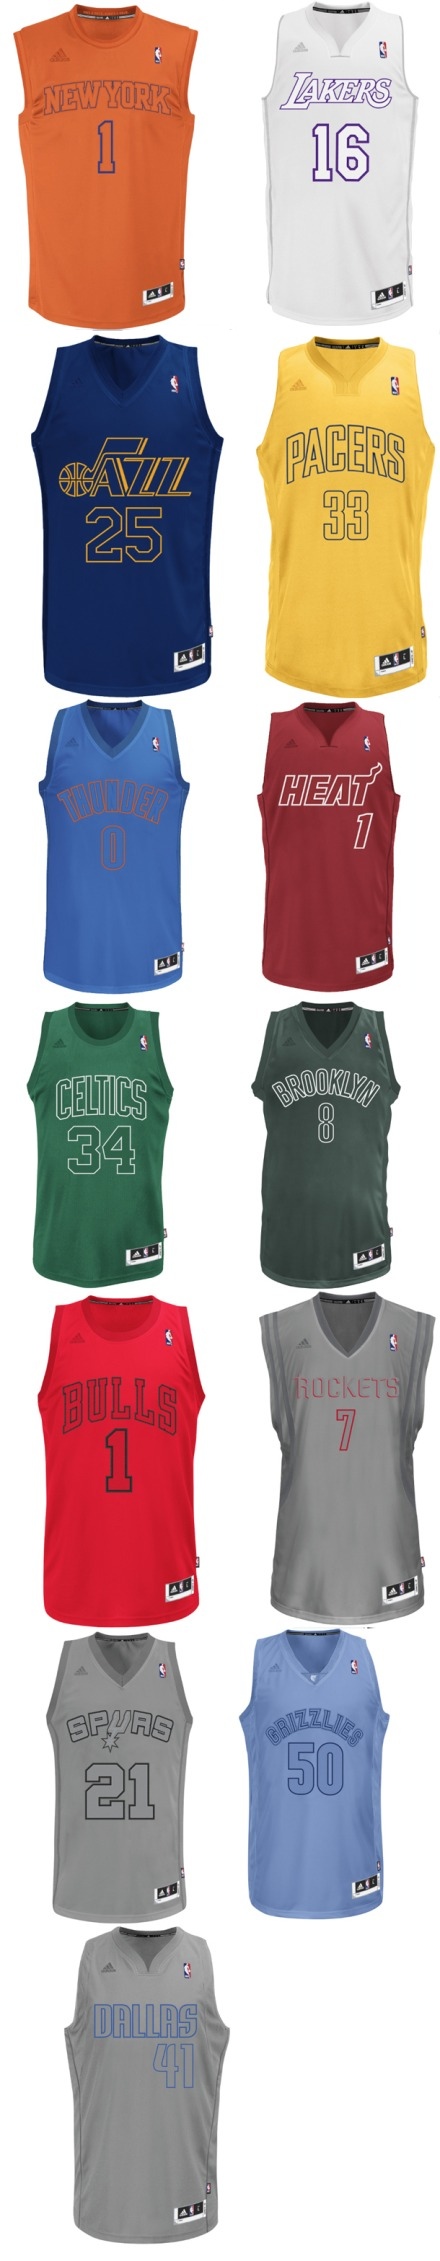 Uni Watch gets the scoop on the NBA's Christmas uniforms - ESPN